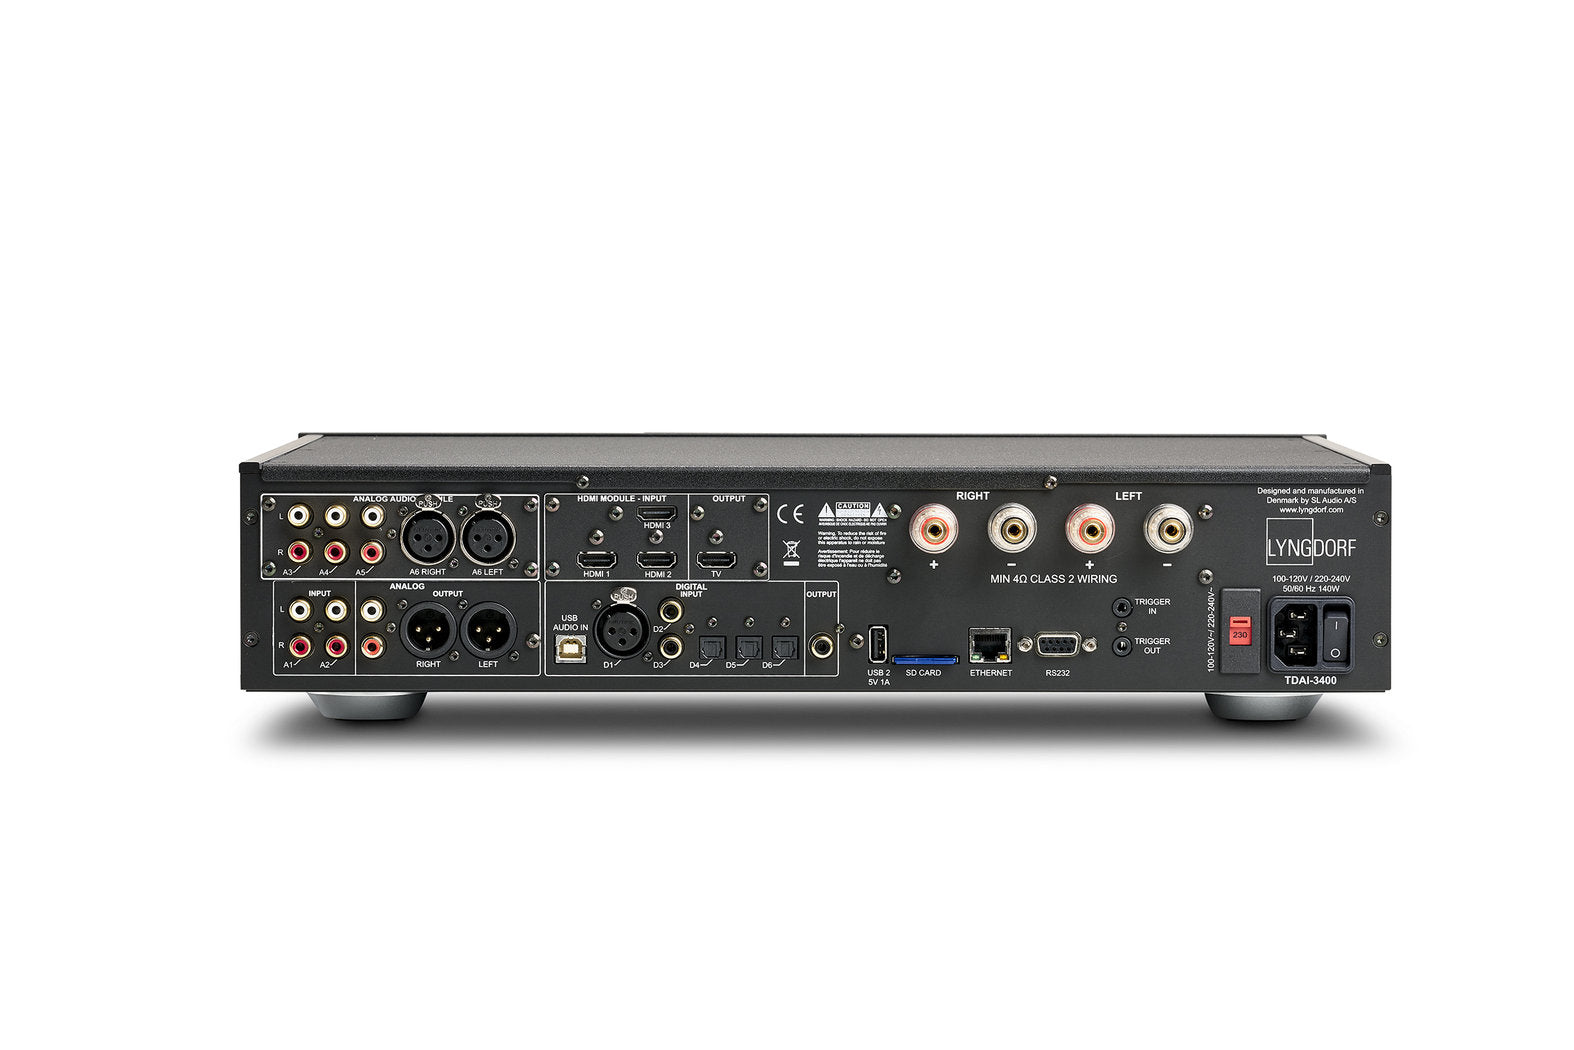 Lyngdorf TDAI-3400 integrated amplifier